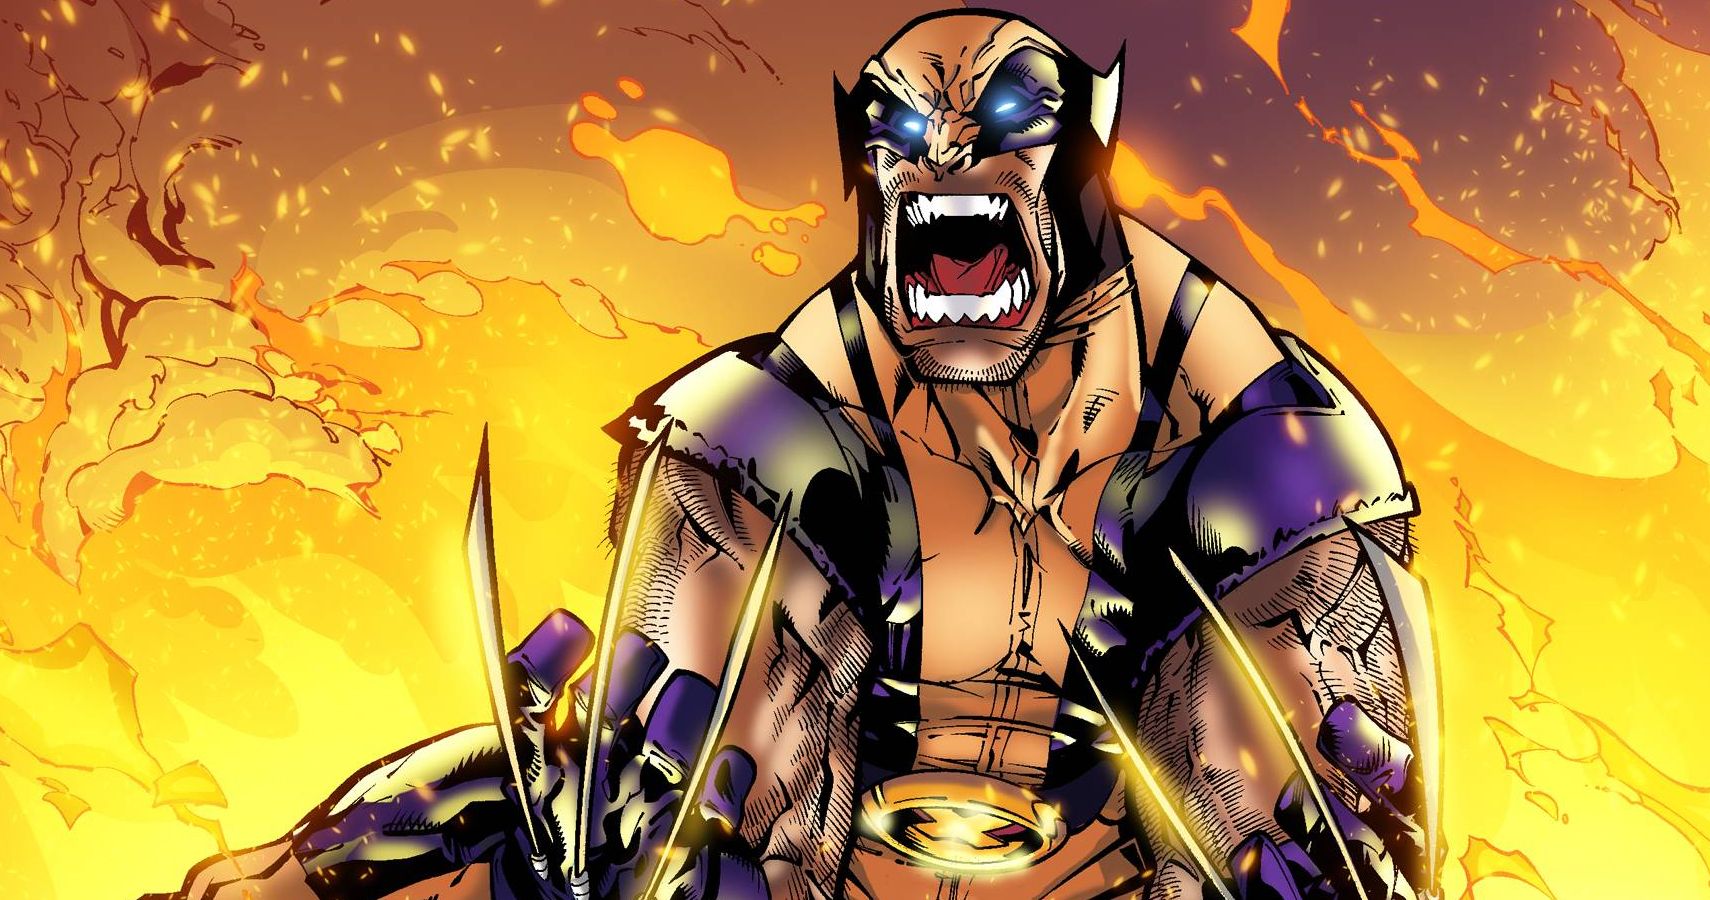 20 Sketchy Things Wolverine Did That Fans Choose To Ignore